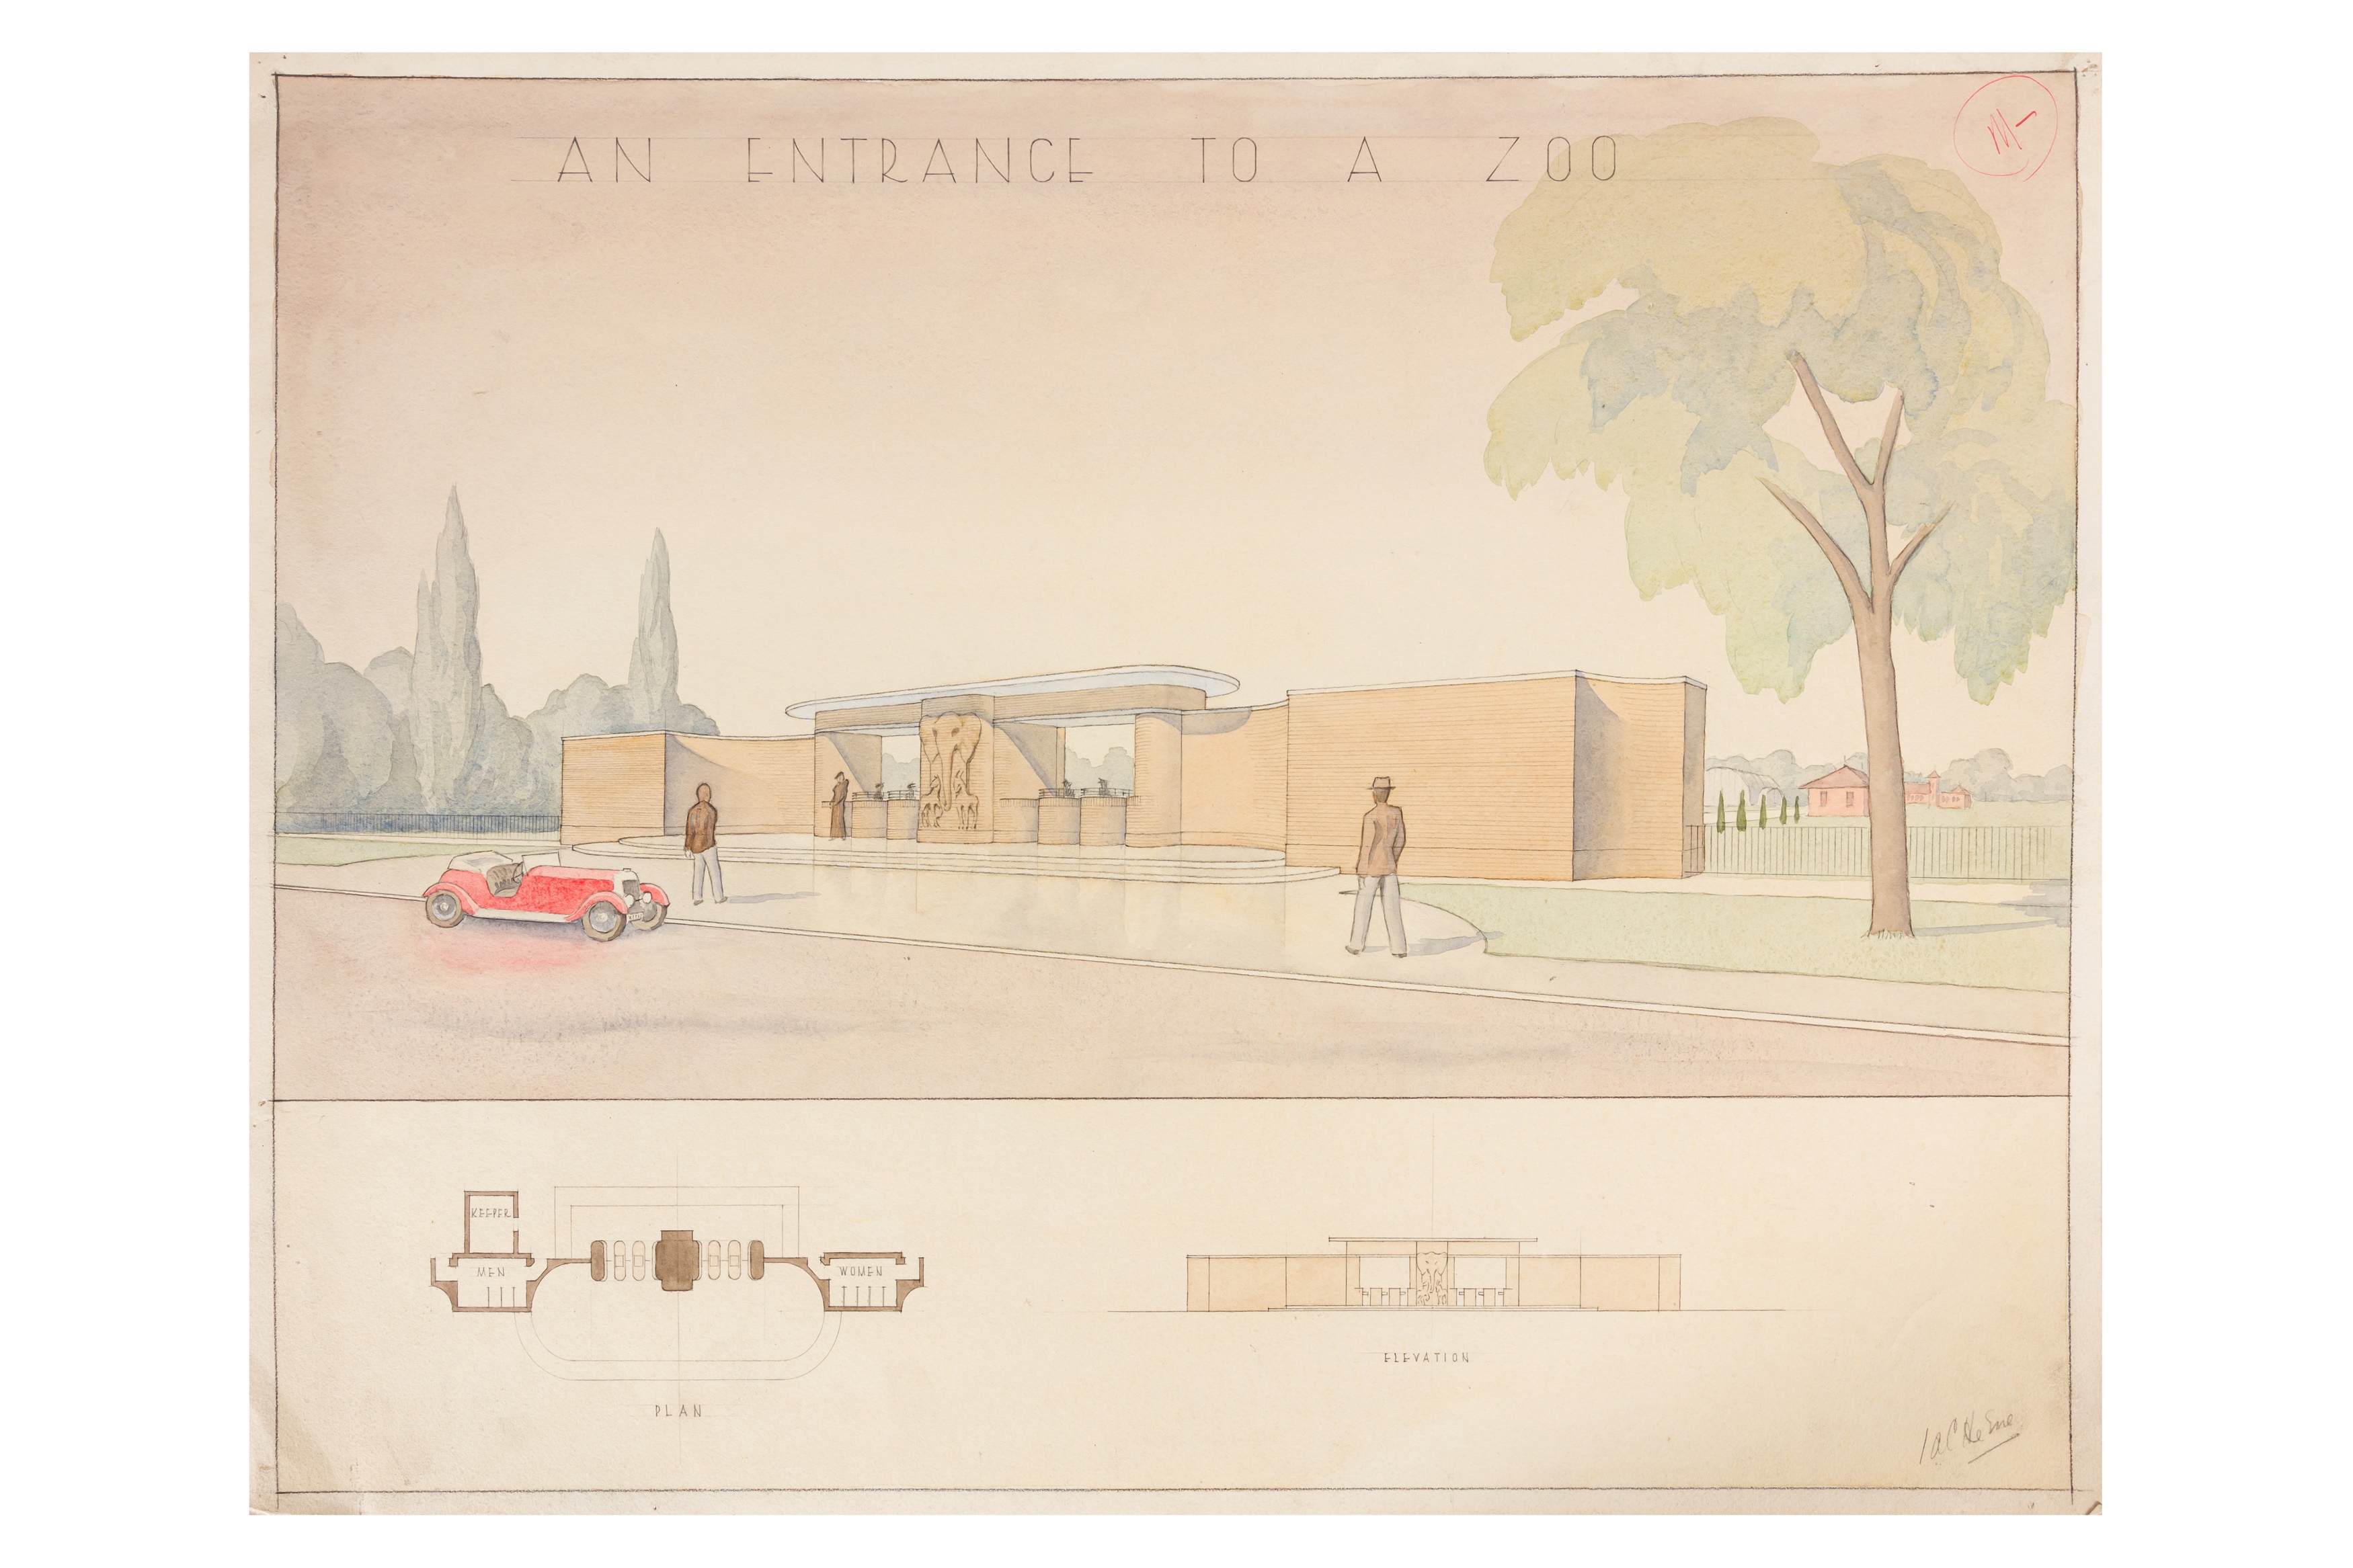 Archive of architect Ivor Herne, works in India, architectural illustrations, plans, stage designs a - Image 2 of 12